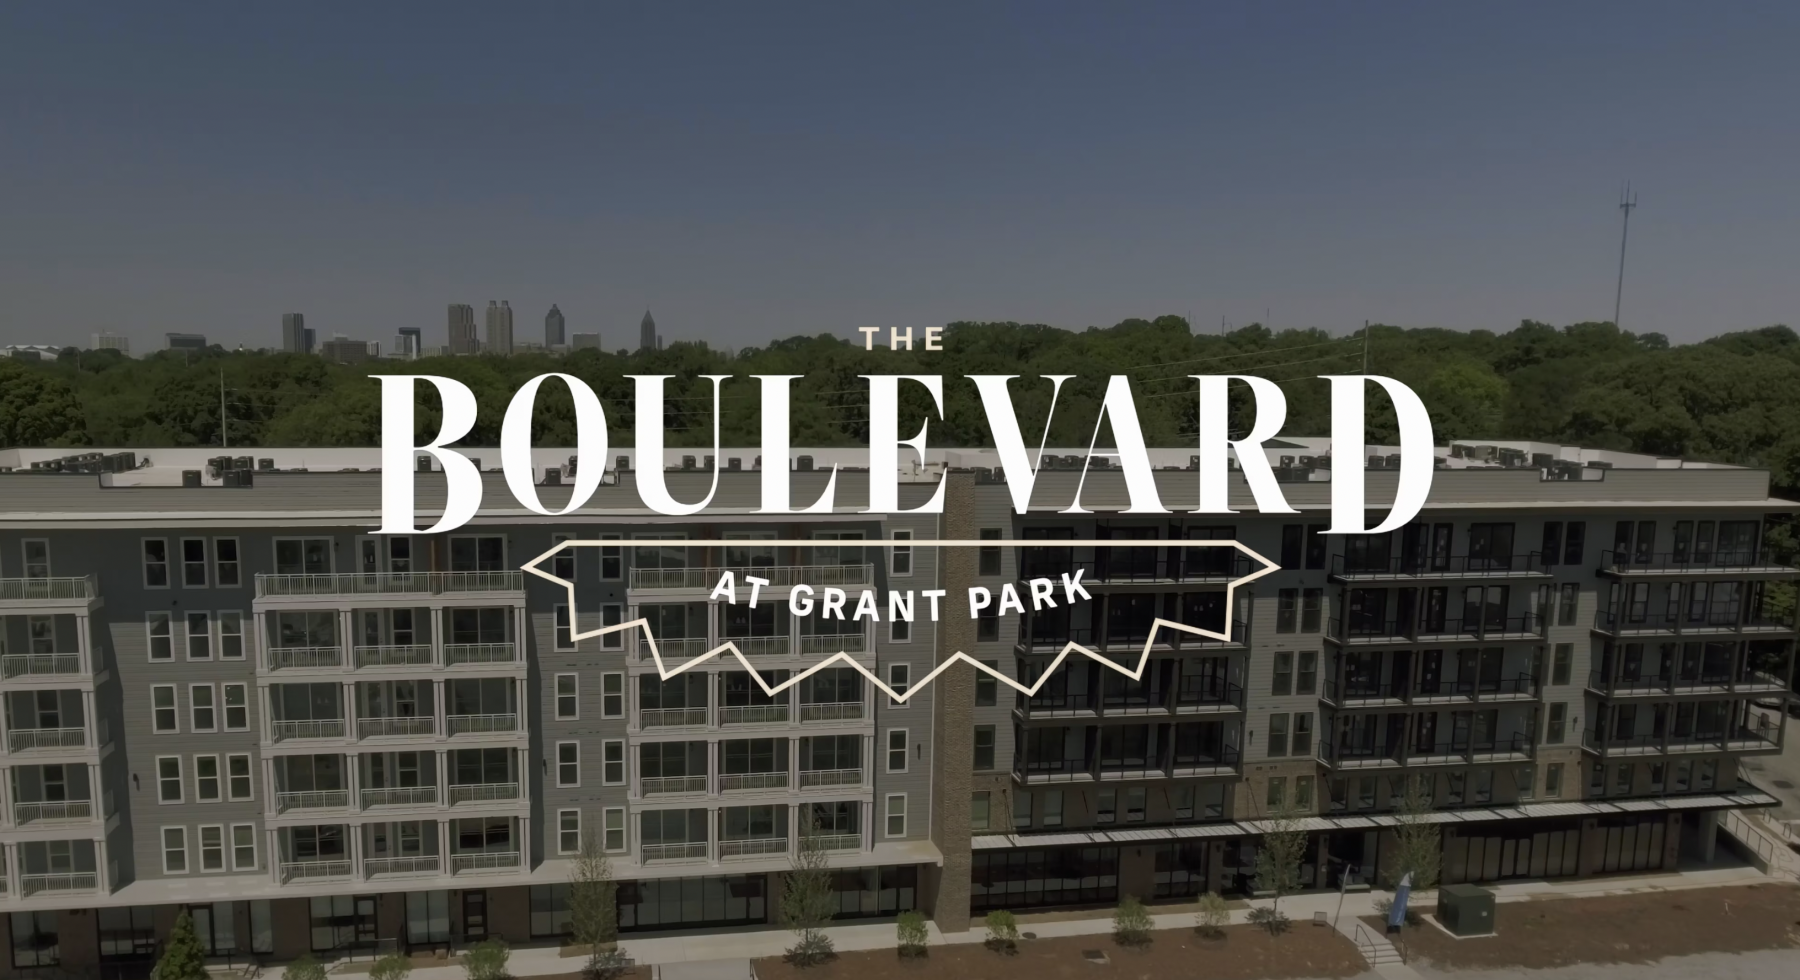 The Boulevard at Grant Park Welcome Video